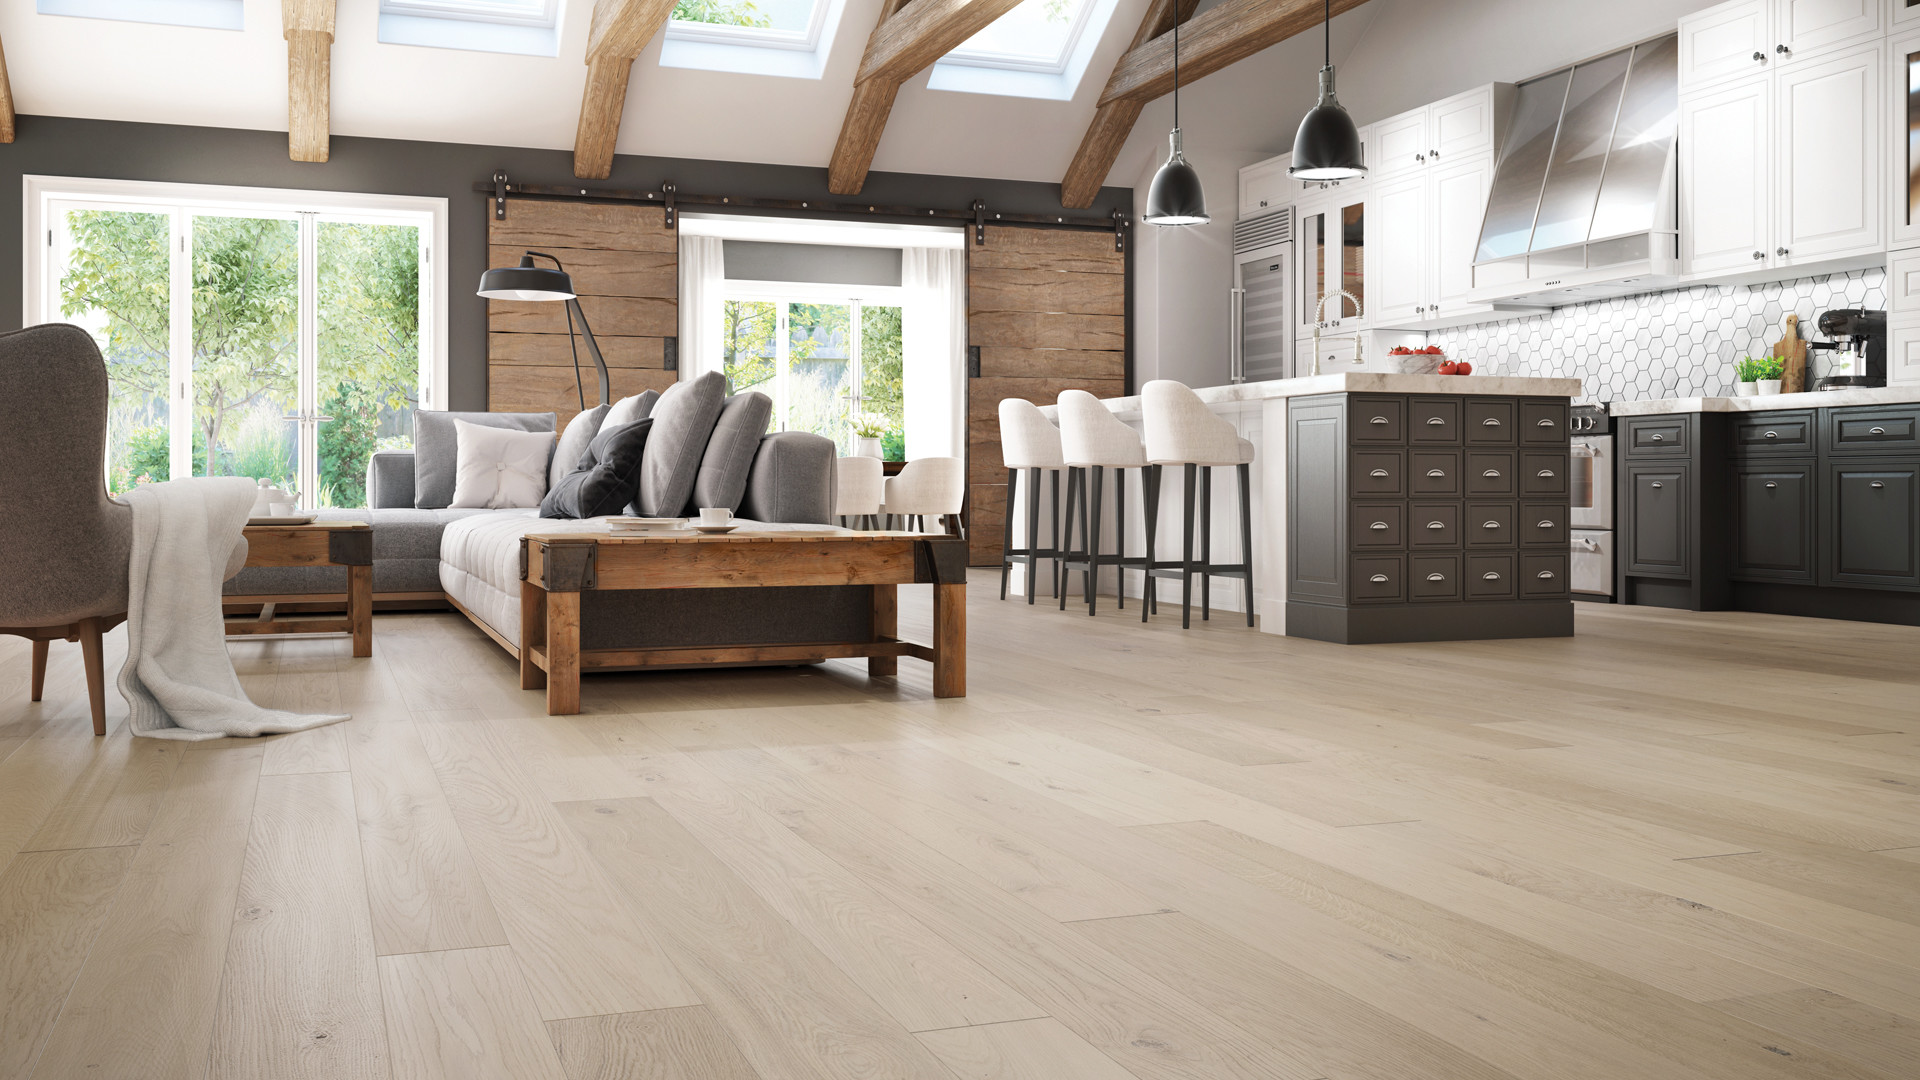 22 attractive Most Popular Engineered Hardwood Flooring Color 2022 free download most popular engineered hardwood flooring color of 4 latest hardwood flooring trends of 2018 lauzon flooring with this technology brings your hardwood floors and well being to a new level by